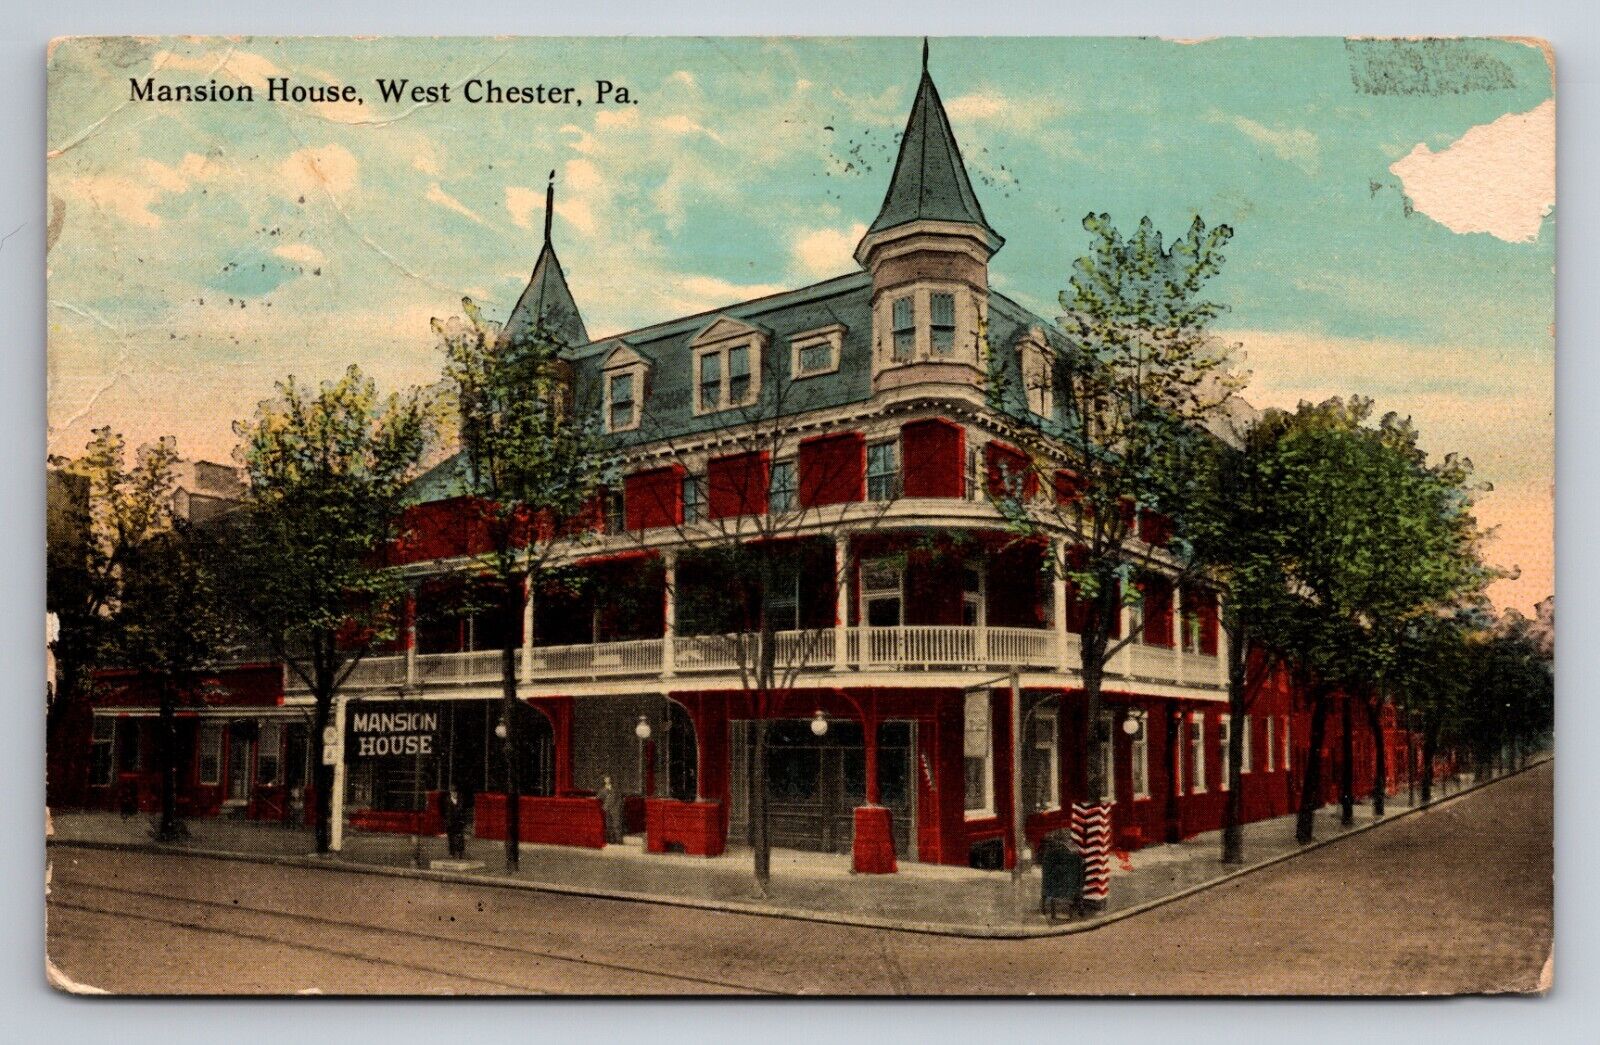 Mansion house West Chester Pennsylvania Vintage Posted 1913 Postcard